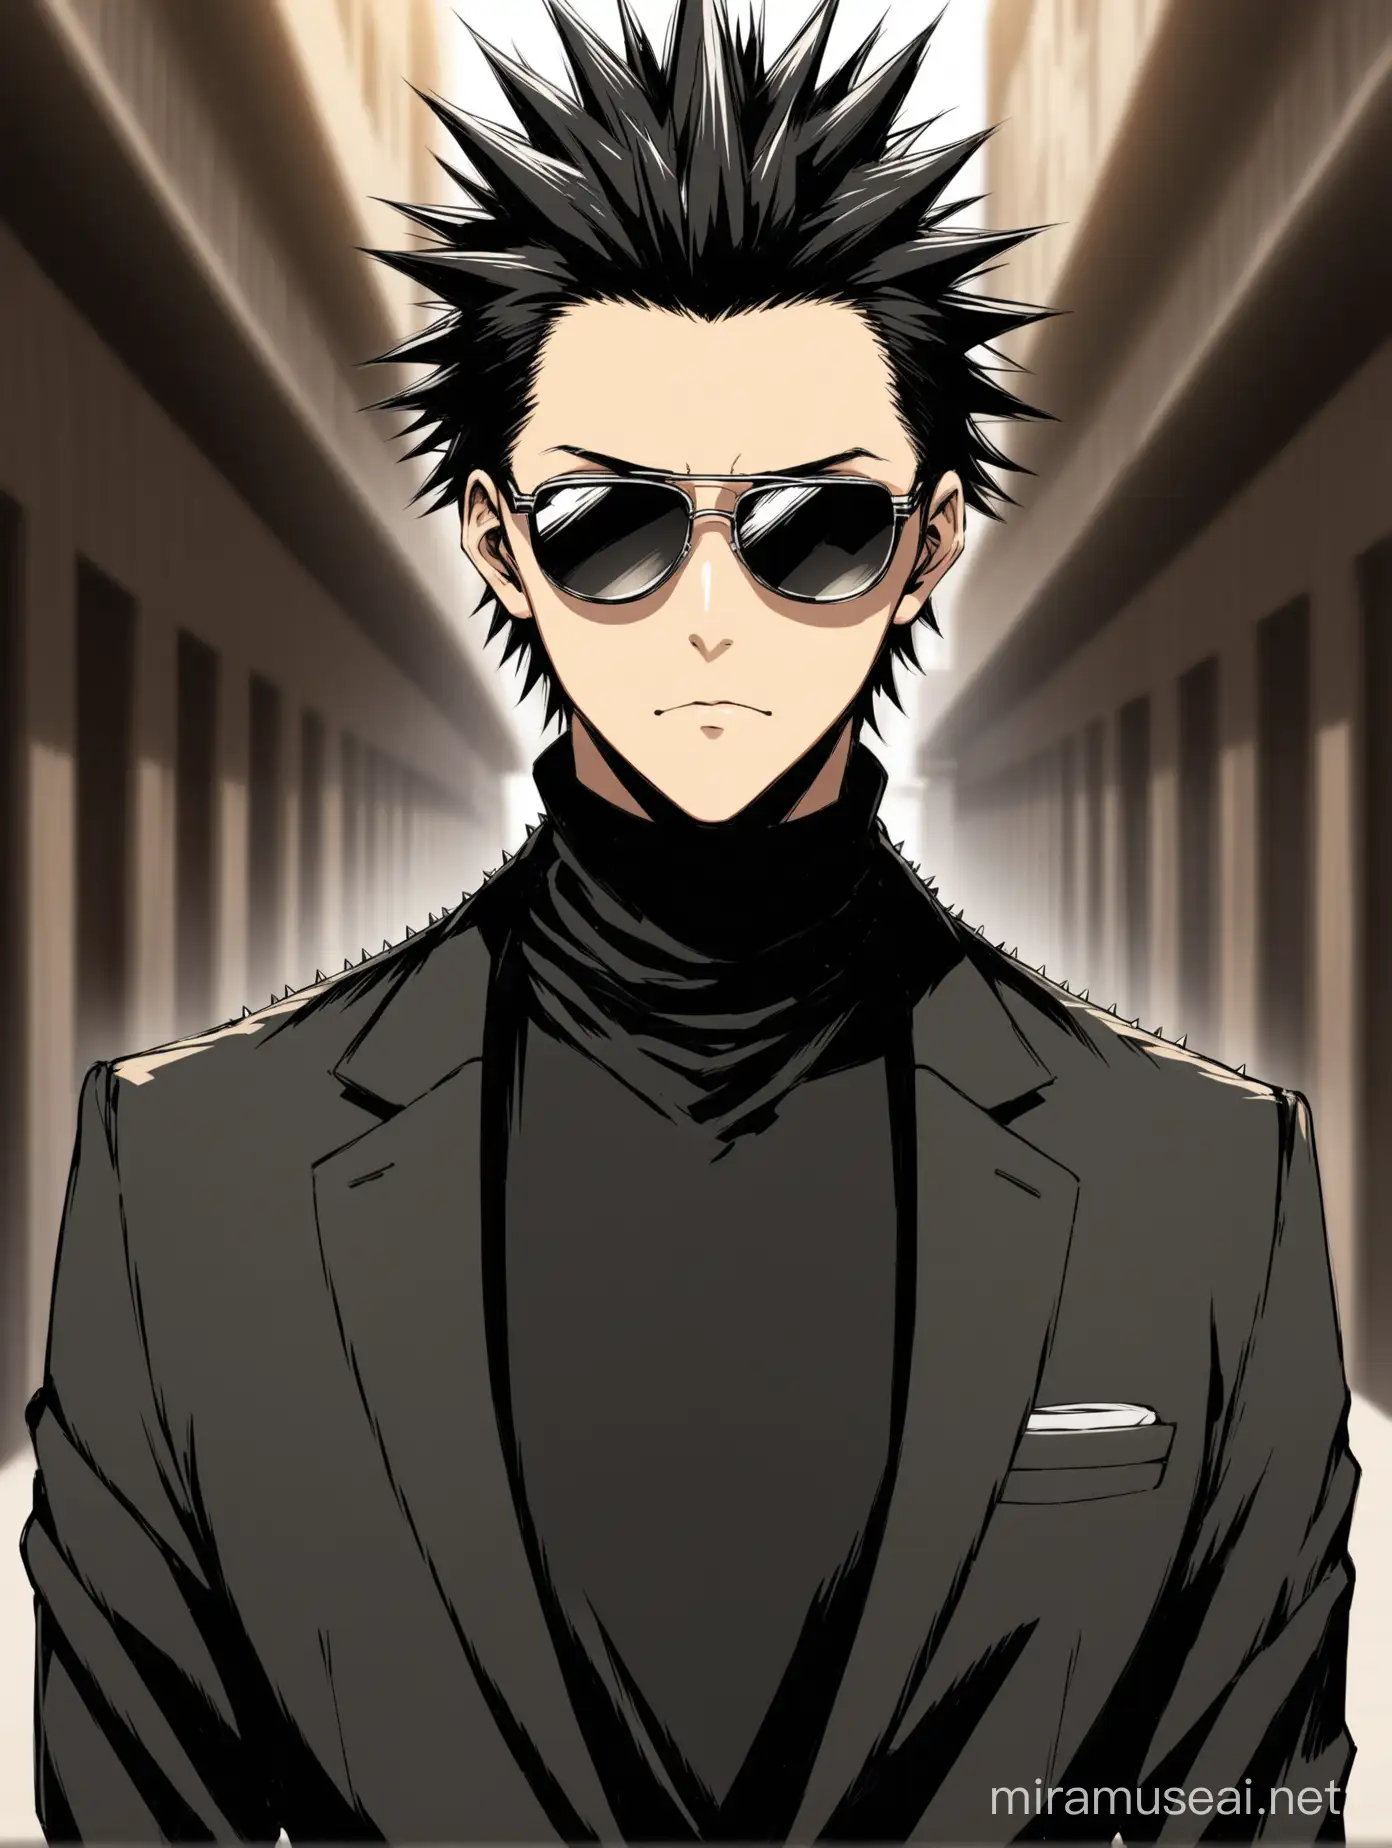 anime guy with spiky hair and wearing sunglasses and suit and a turtleneck facing forward at the camera